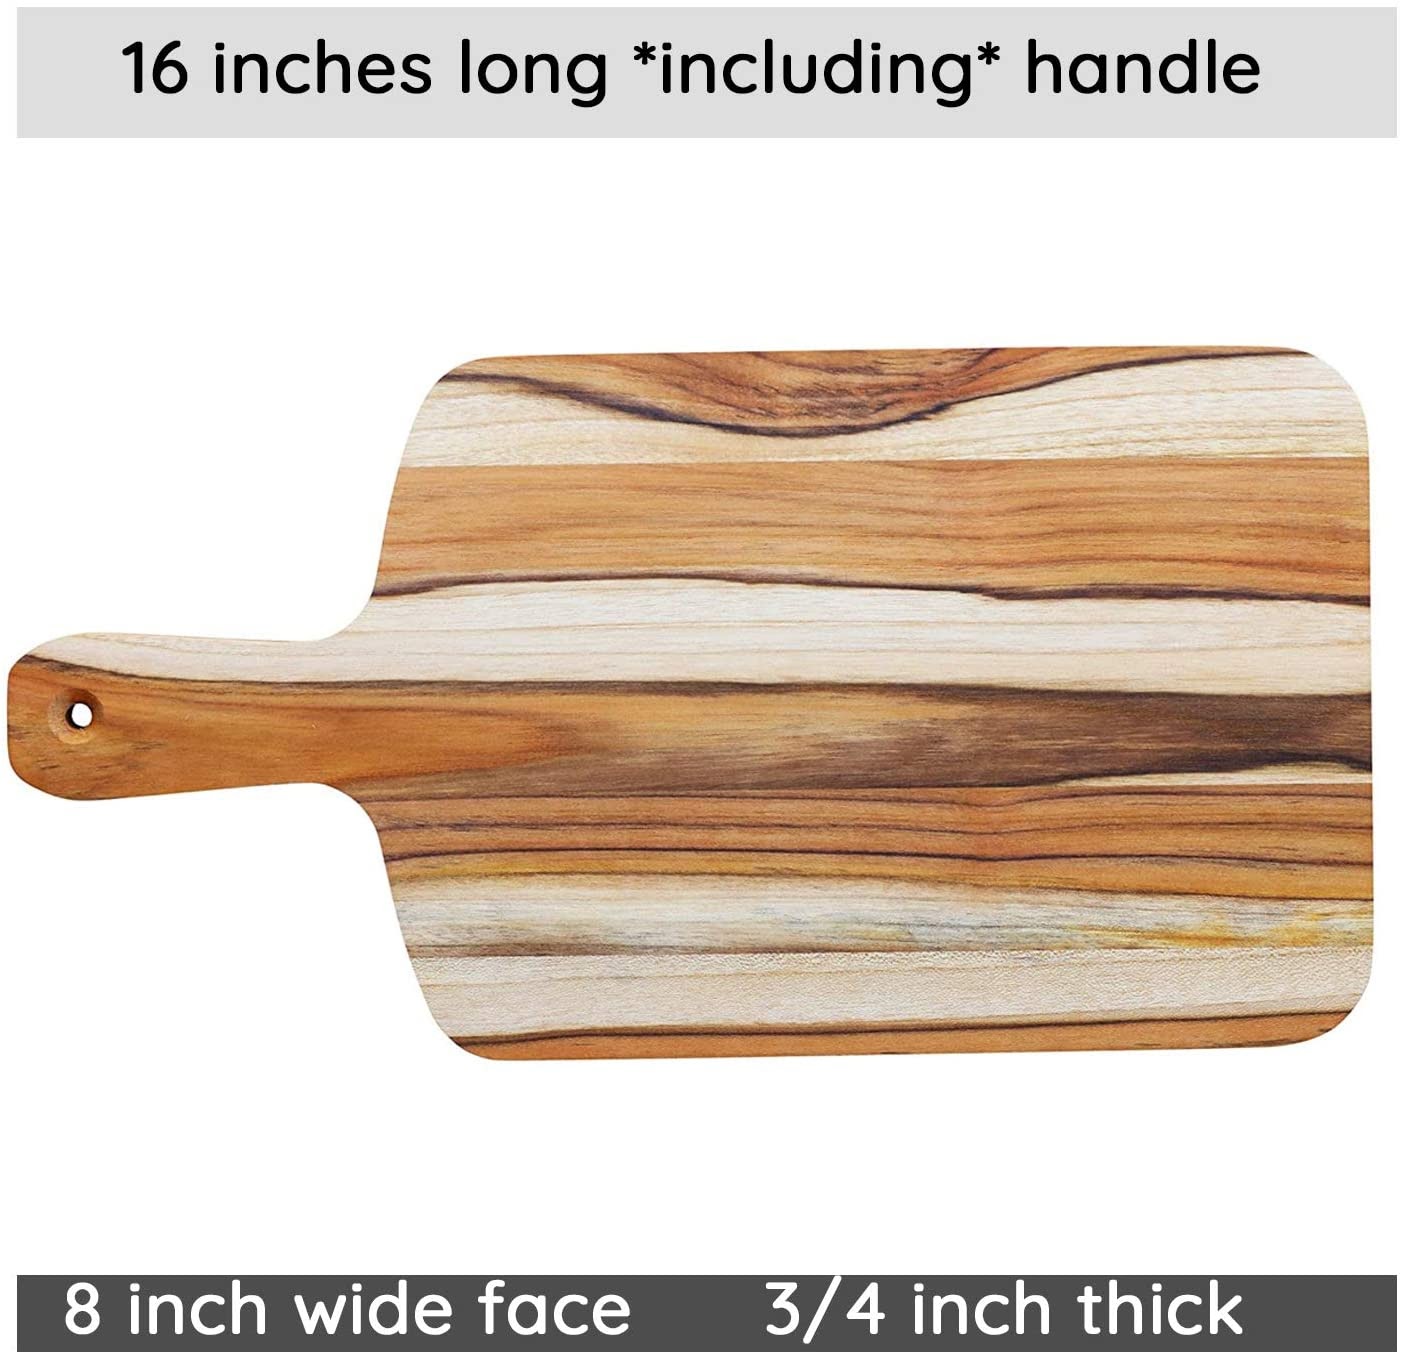 Terra Teak Wood Cutting Board and Serving Platter with Handle